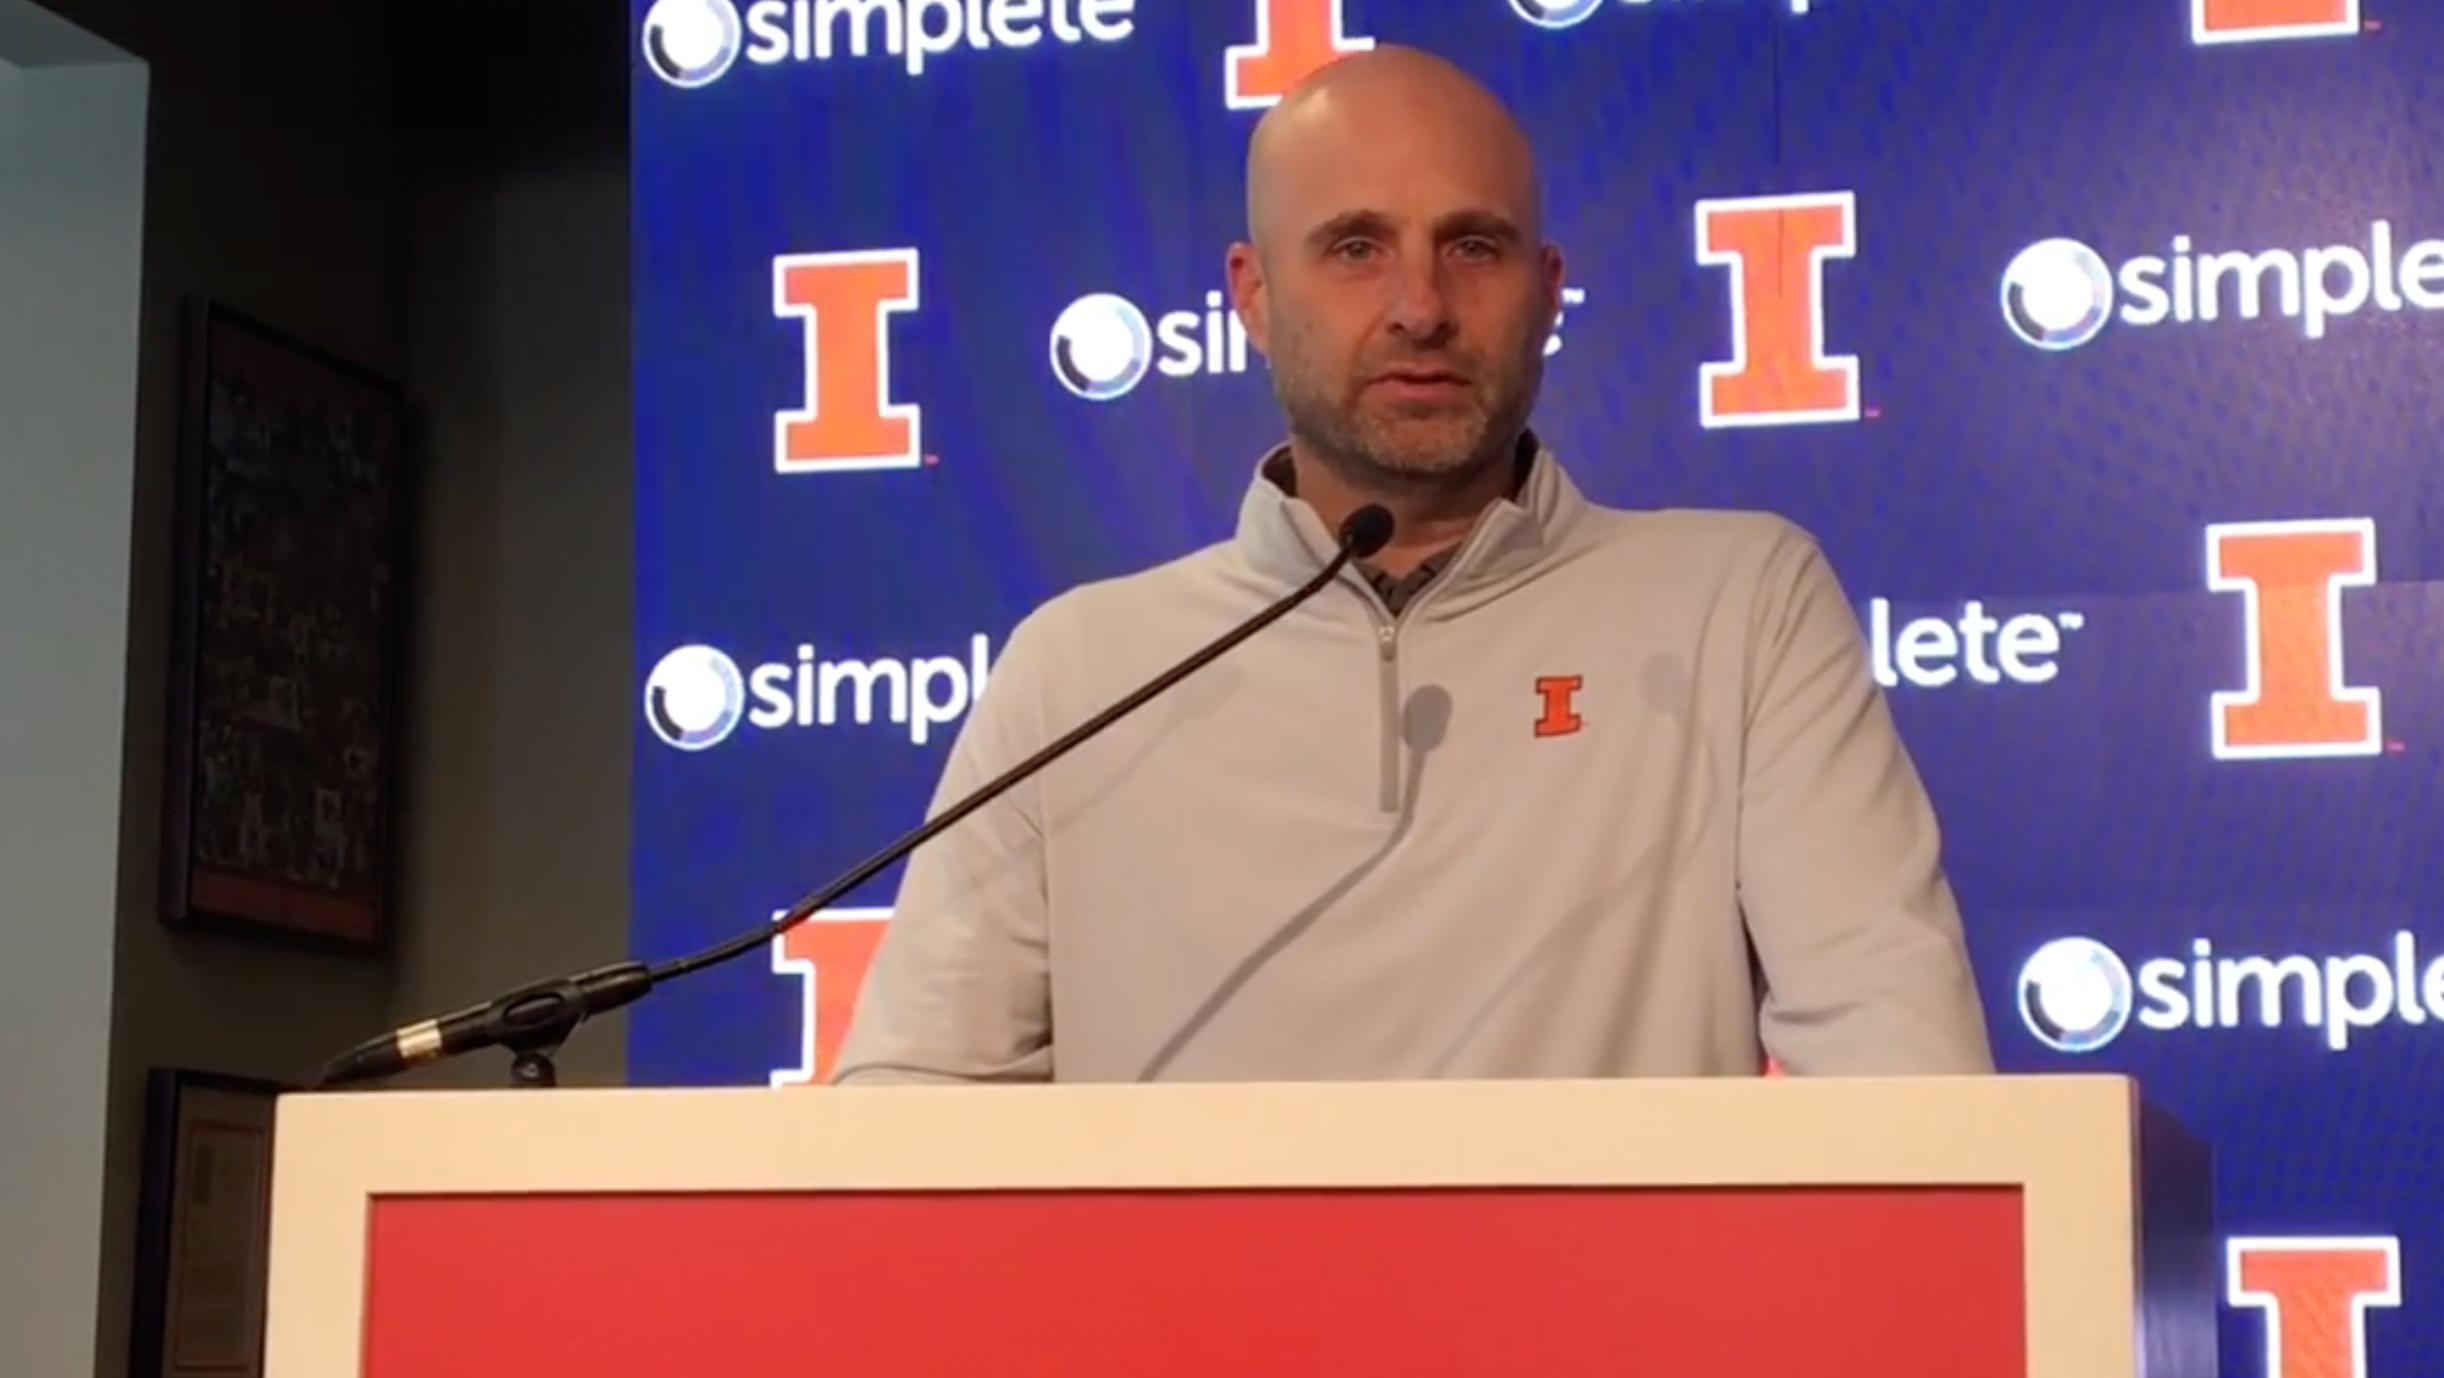 “You want Chase Brown to have a chance to impact the game”: Illini OC Explains His End-Game Thinking at Michigan